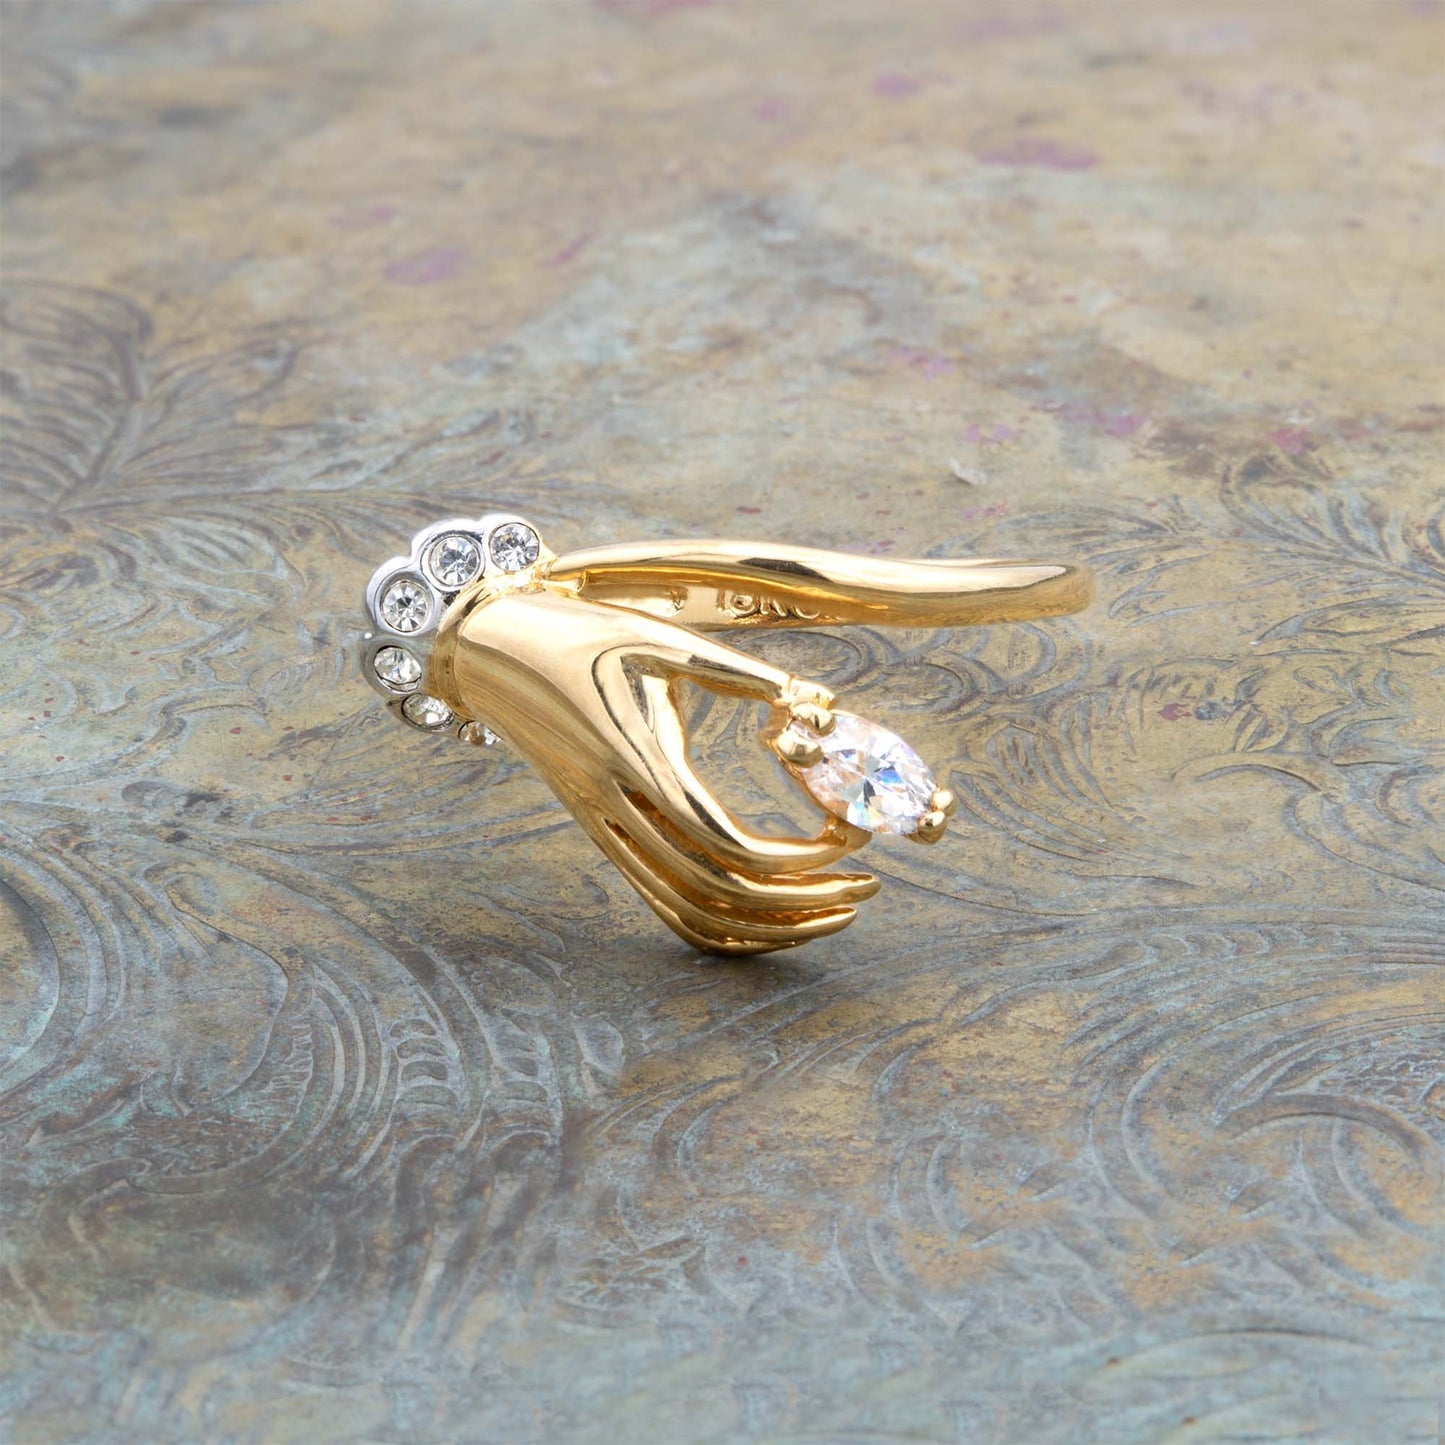 Vintage Ring Clear Austrian Crystals 18k Gold Womans Antique Jewlery Dainty Boho Stacking Handmade Dainty R2964 - Limited Stock - Never Worn